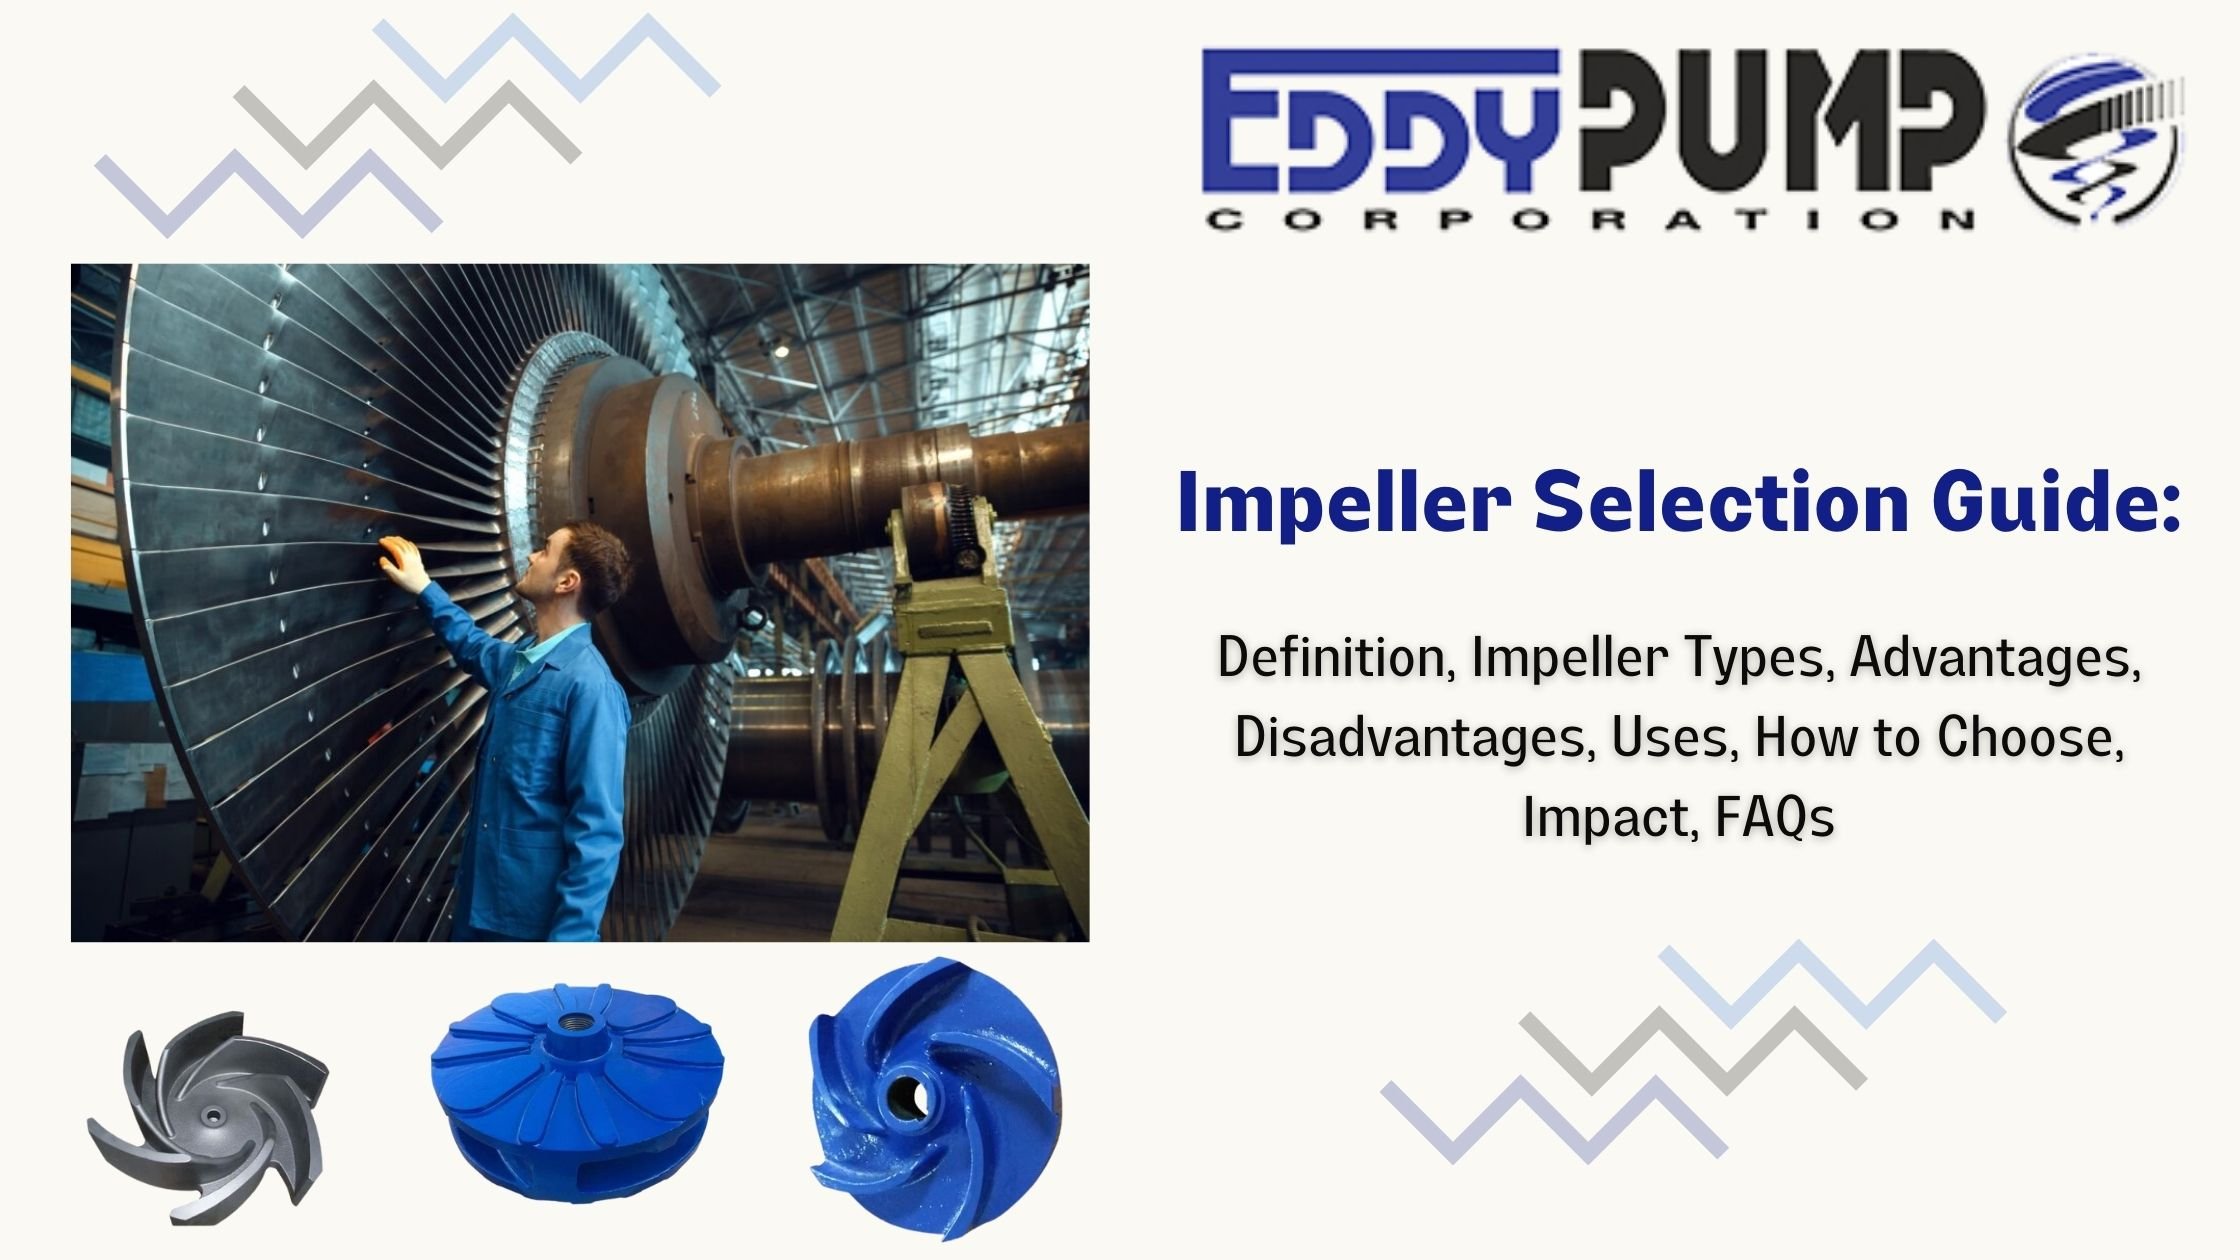 Complete Guide to Impeller Selection - Types, Uses and How do they Work